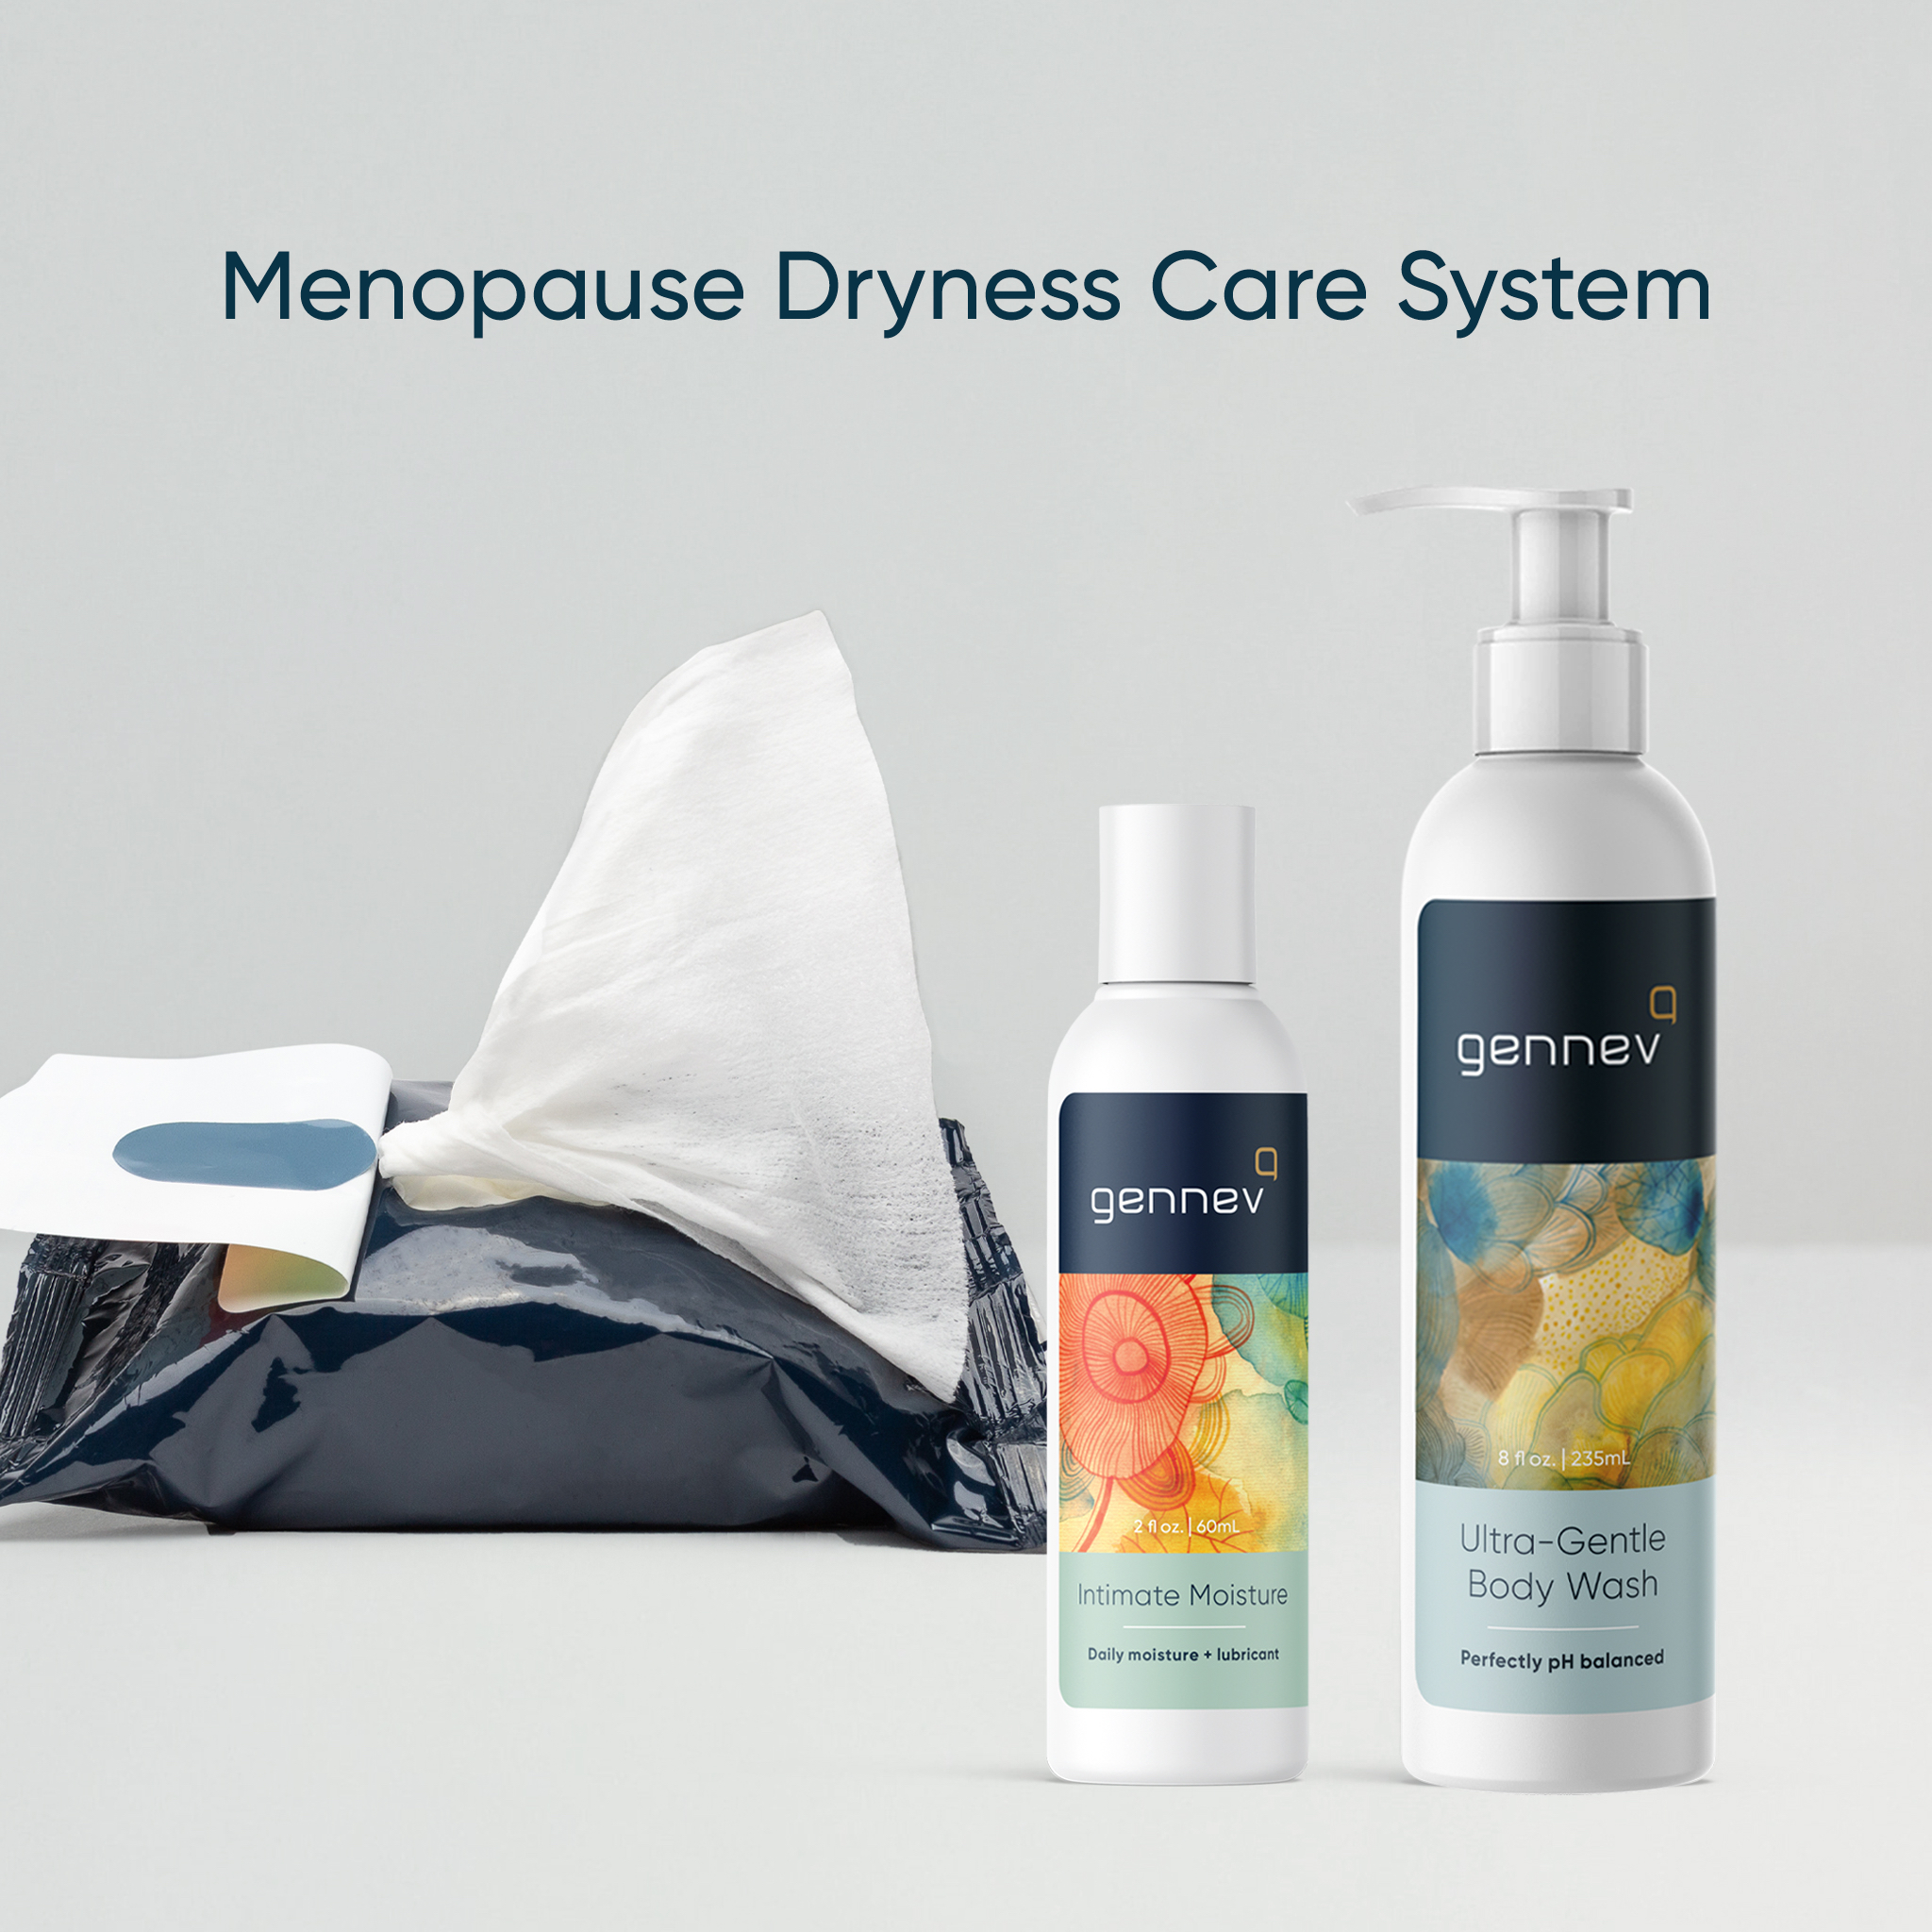 The Gennev Menopause Dryness Care System helps soothe vaginal dryness with a personal care menopause moisture care system formulated by OB/GYNs and naturopathic doctors